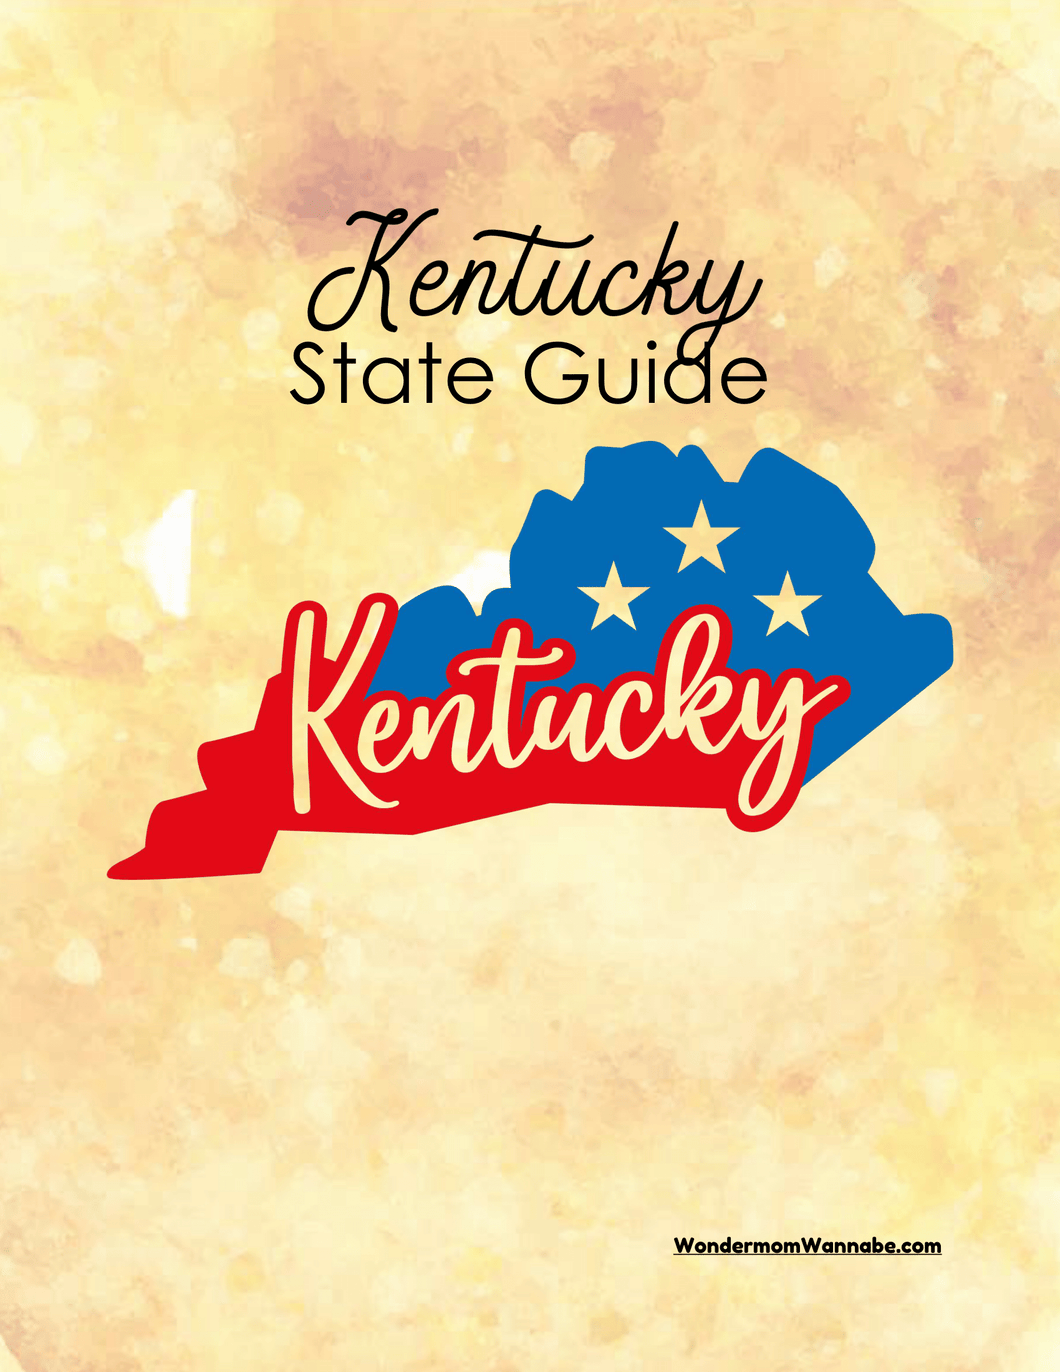 Kentucky Travel Guide and Activity Kit for Kids